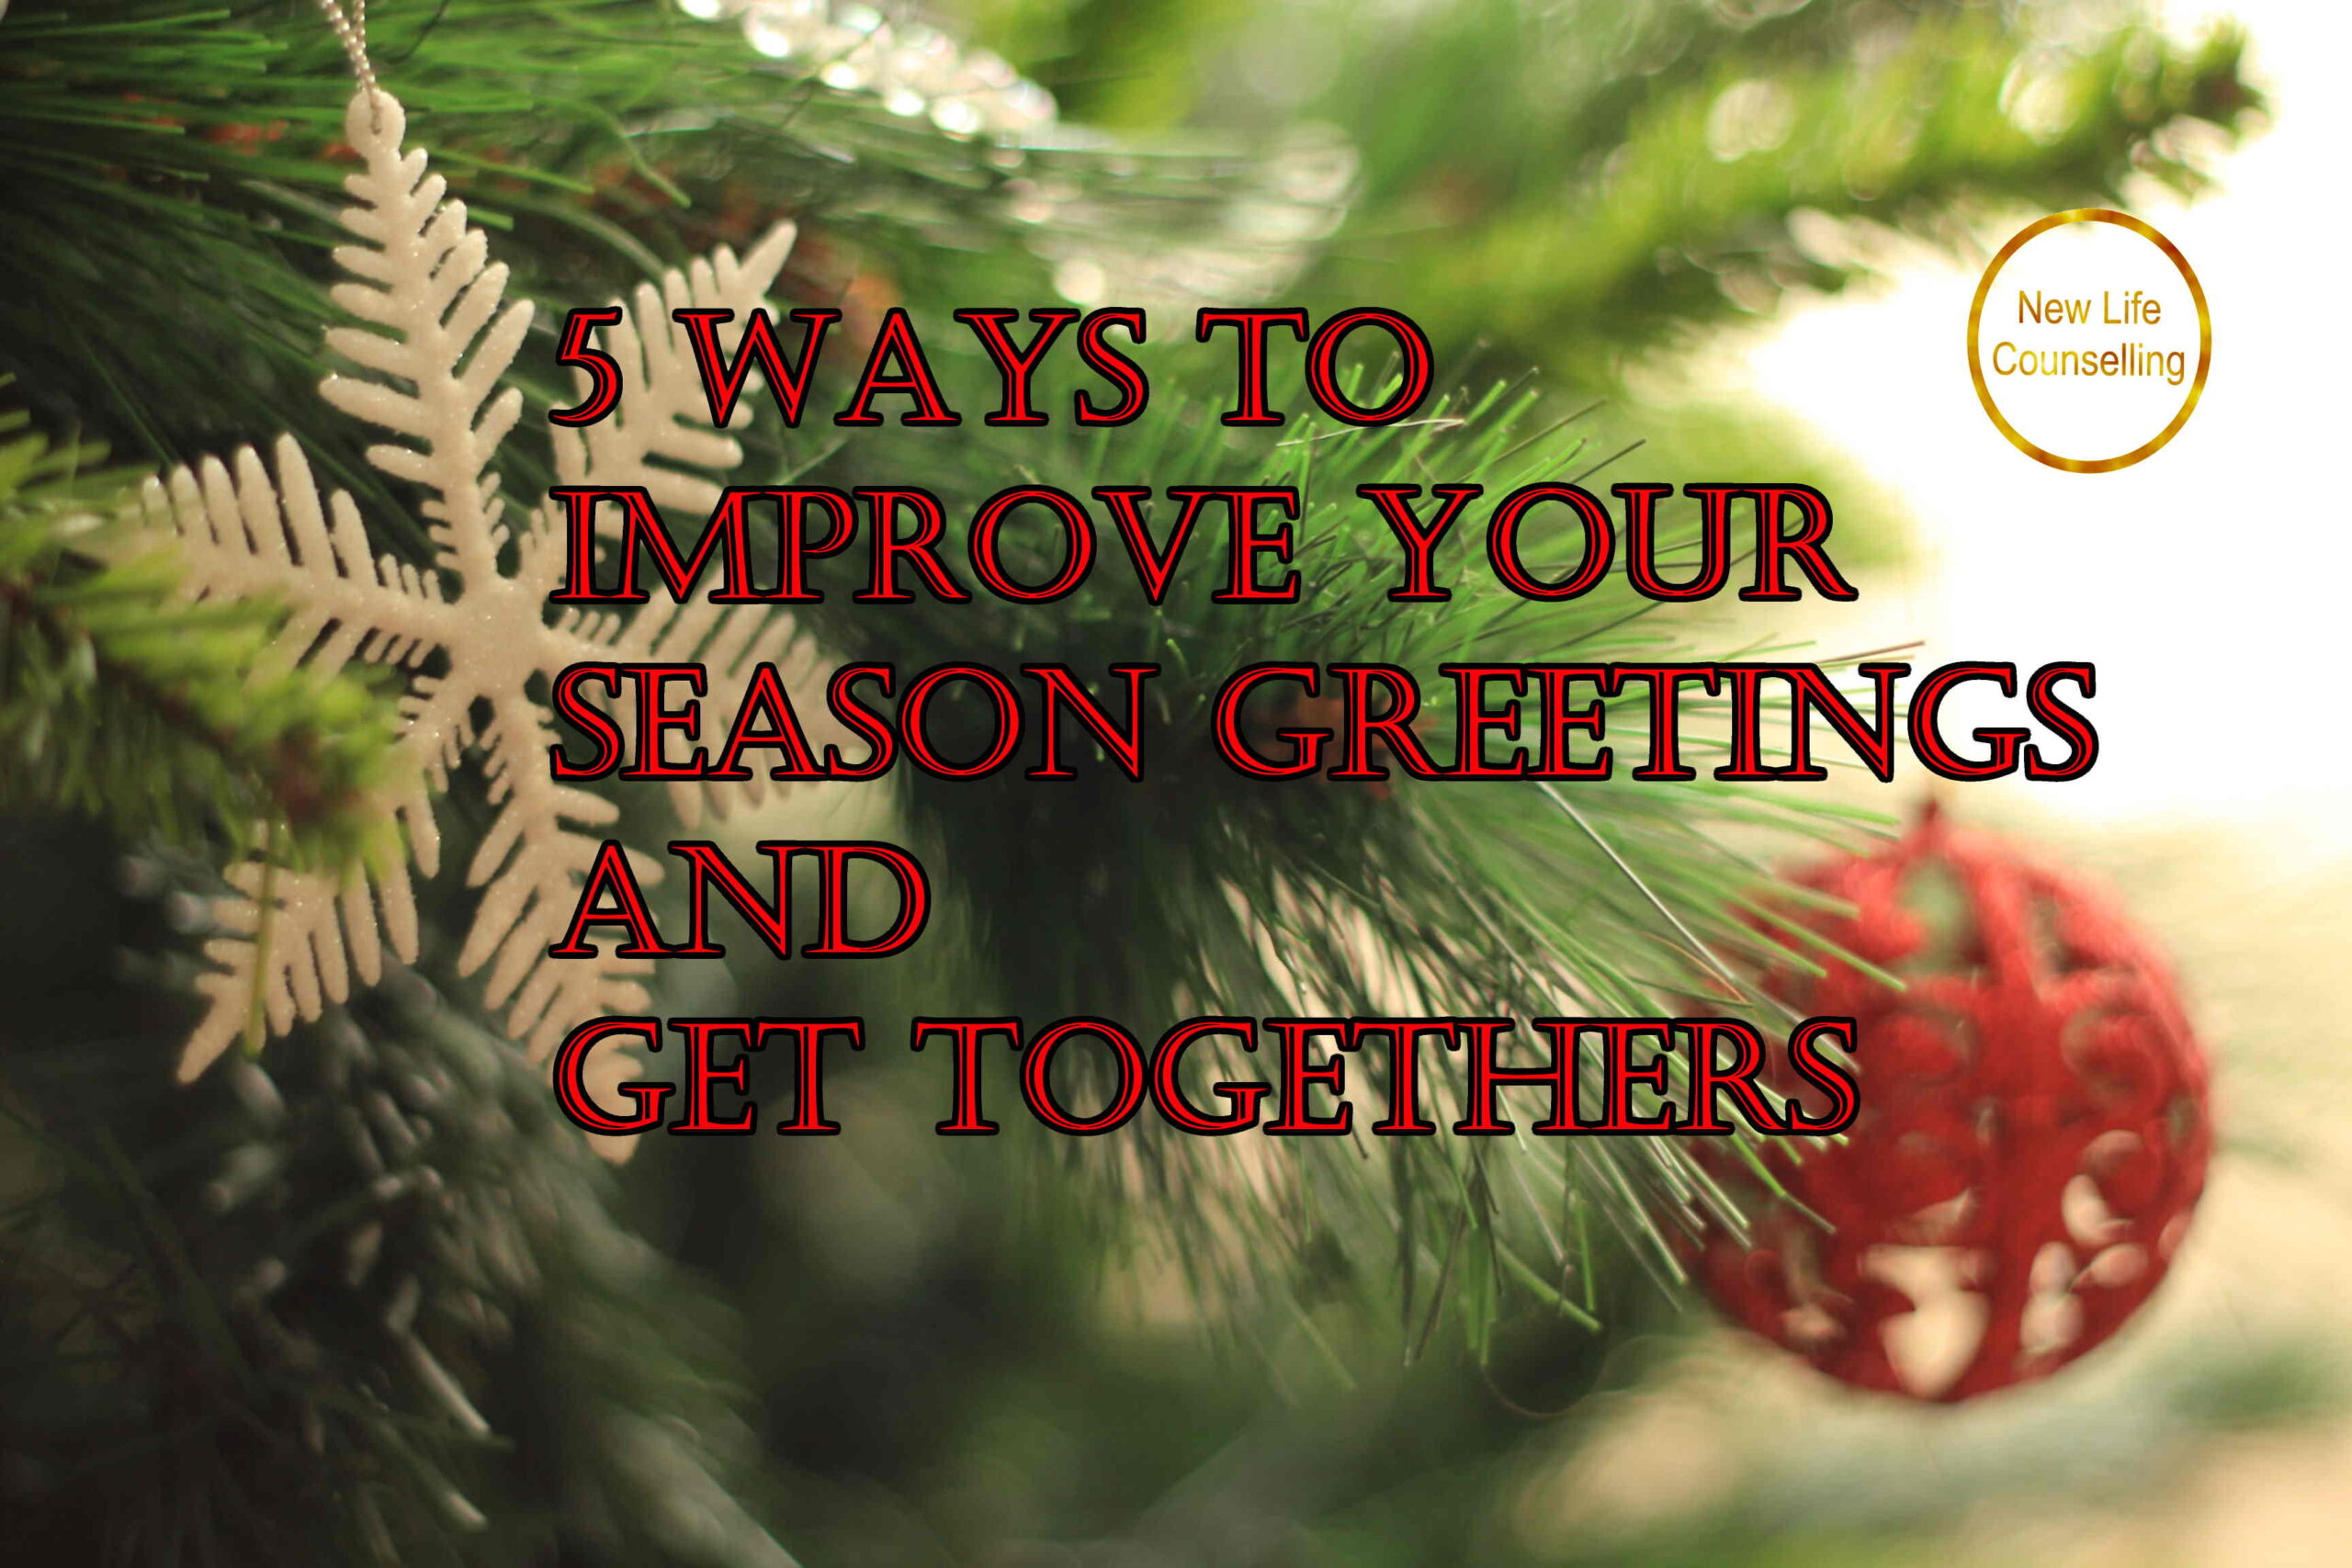 You are currently viewing 5 Ways to Improve Your Season Greetings and Get Togethers